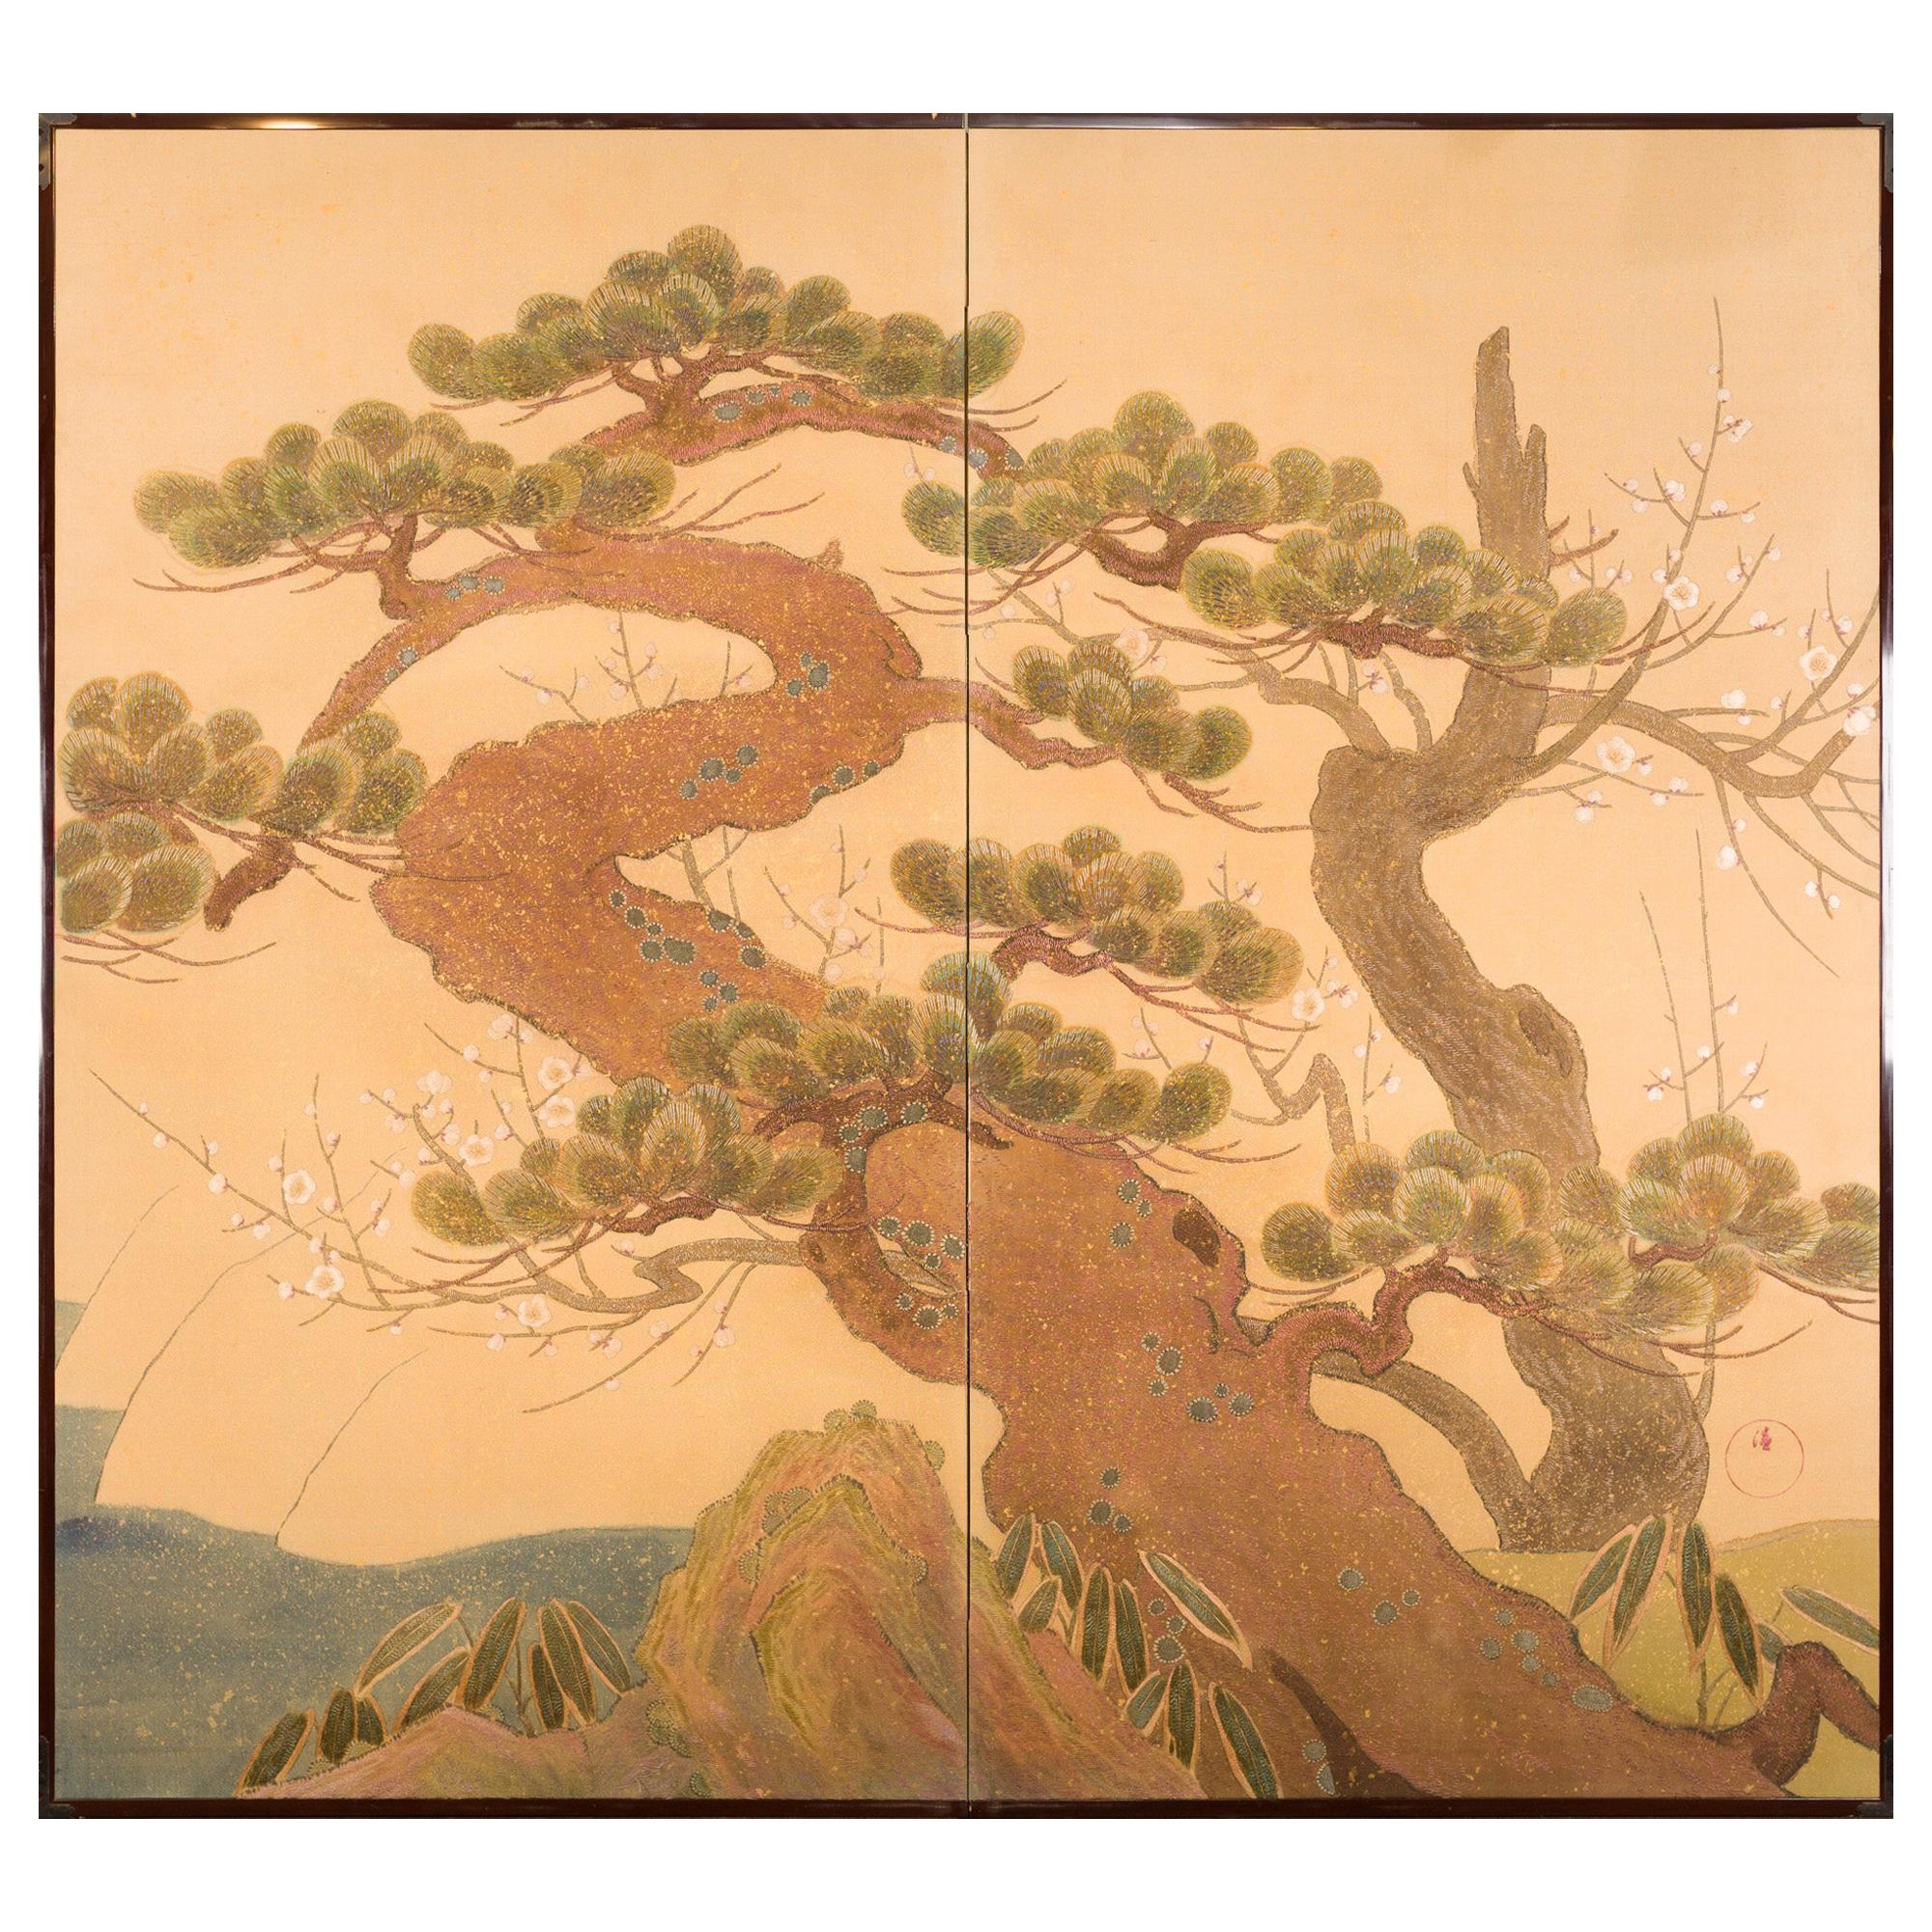 Japanese Two-Panel Screen, Embroidered Pine at Water's Edge